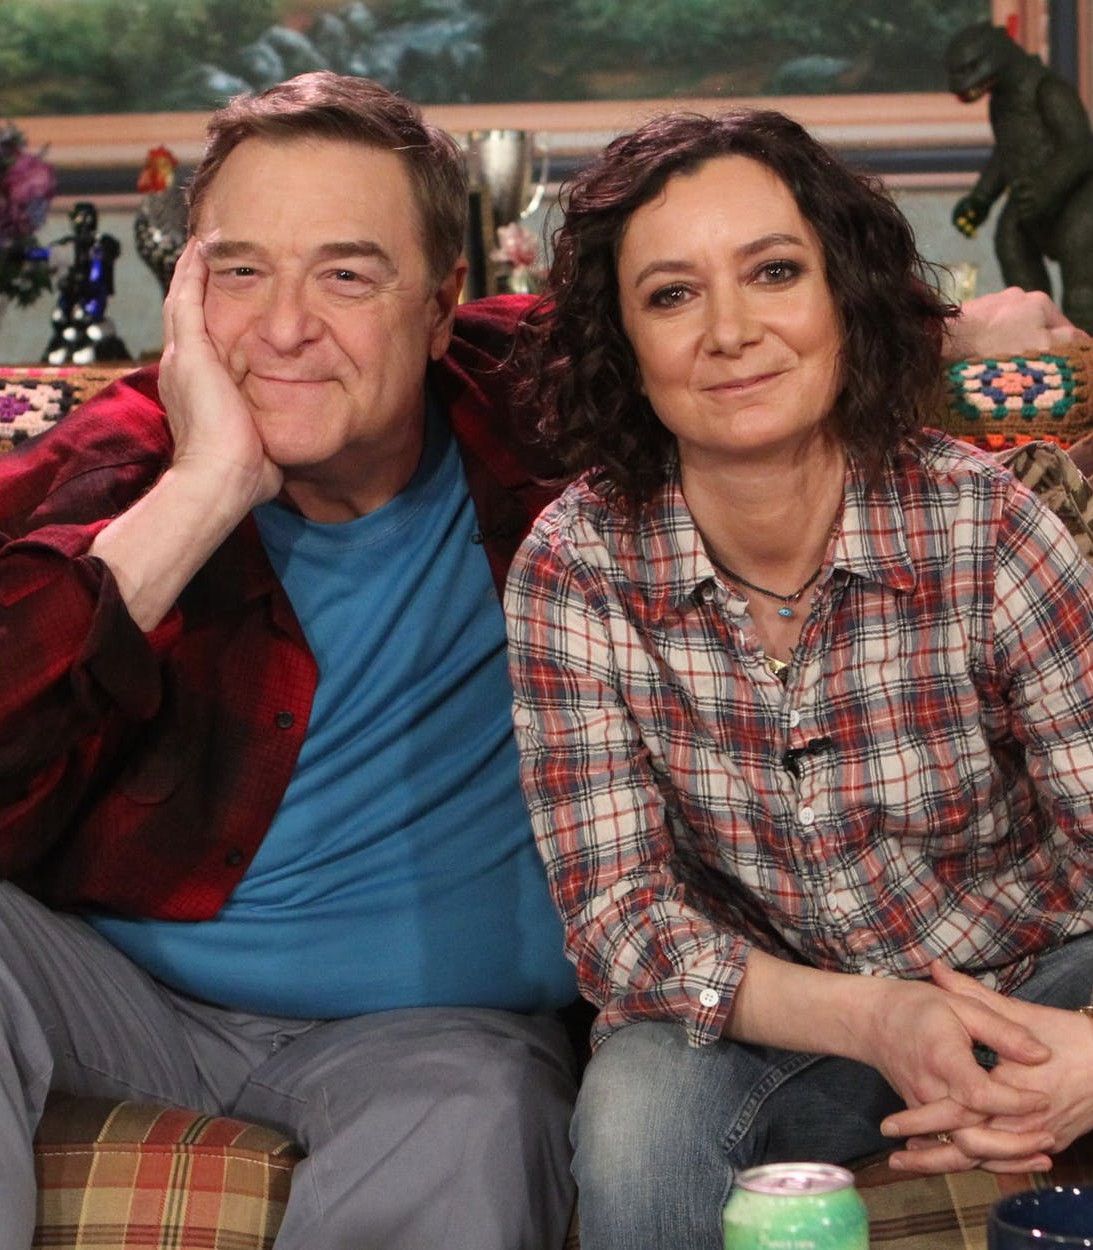 John-Goodman-And-Sara-Gilbert-in-The-Conners-TLDR-Vertical